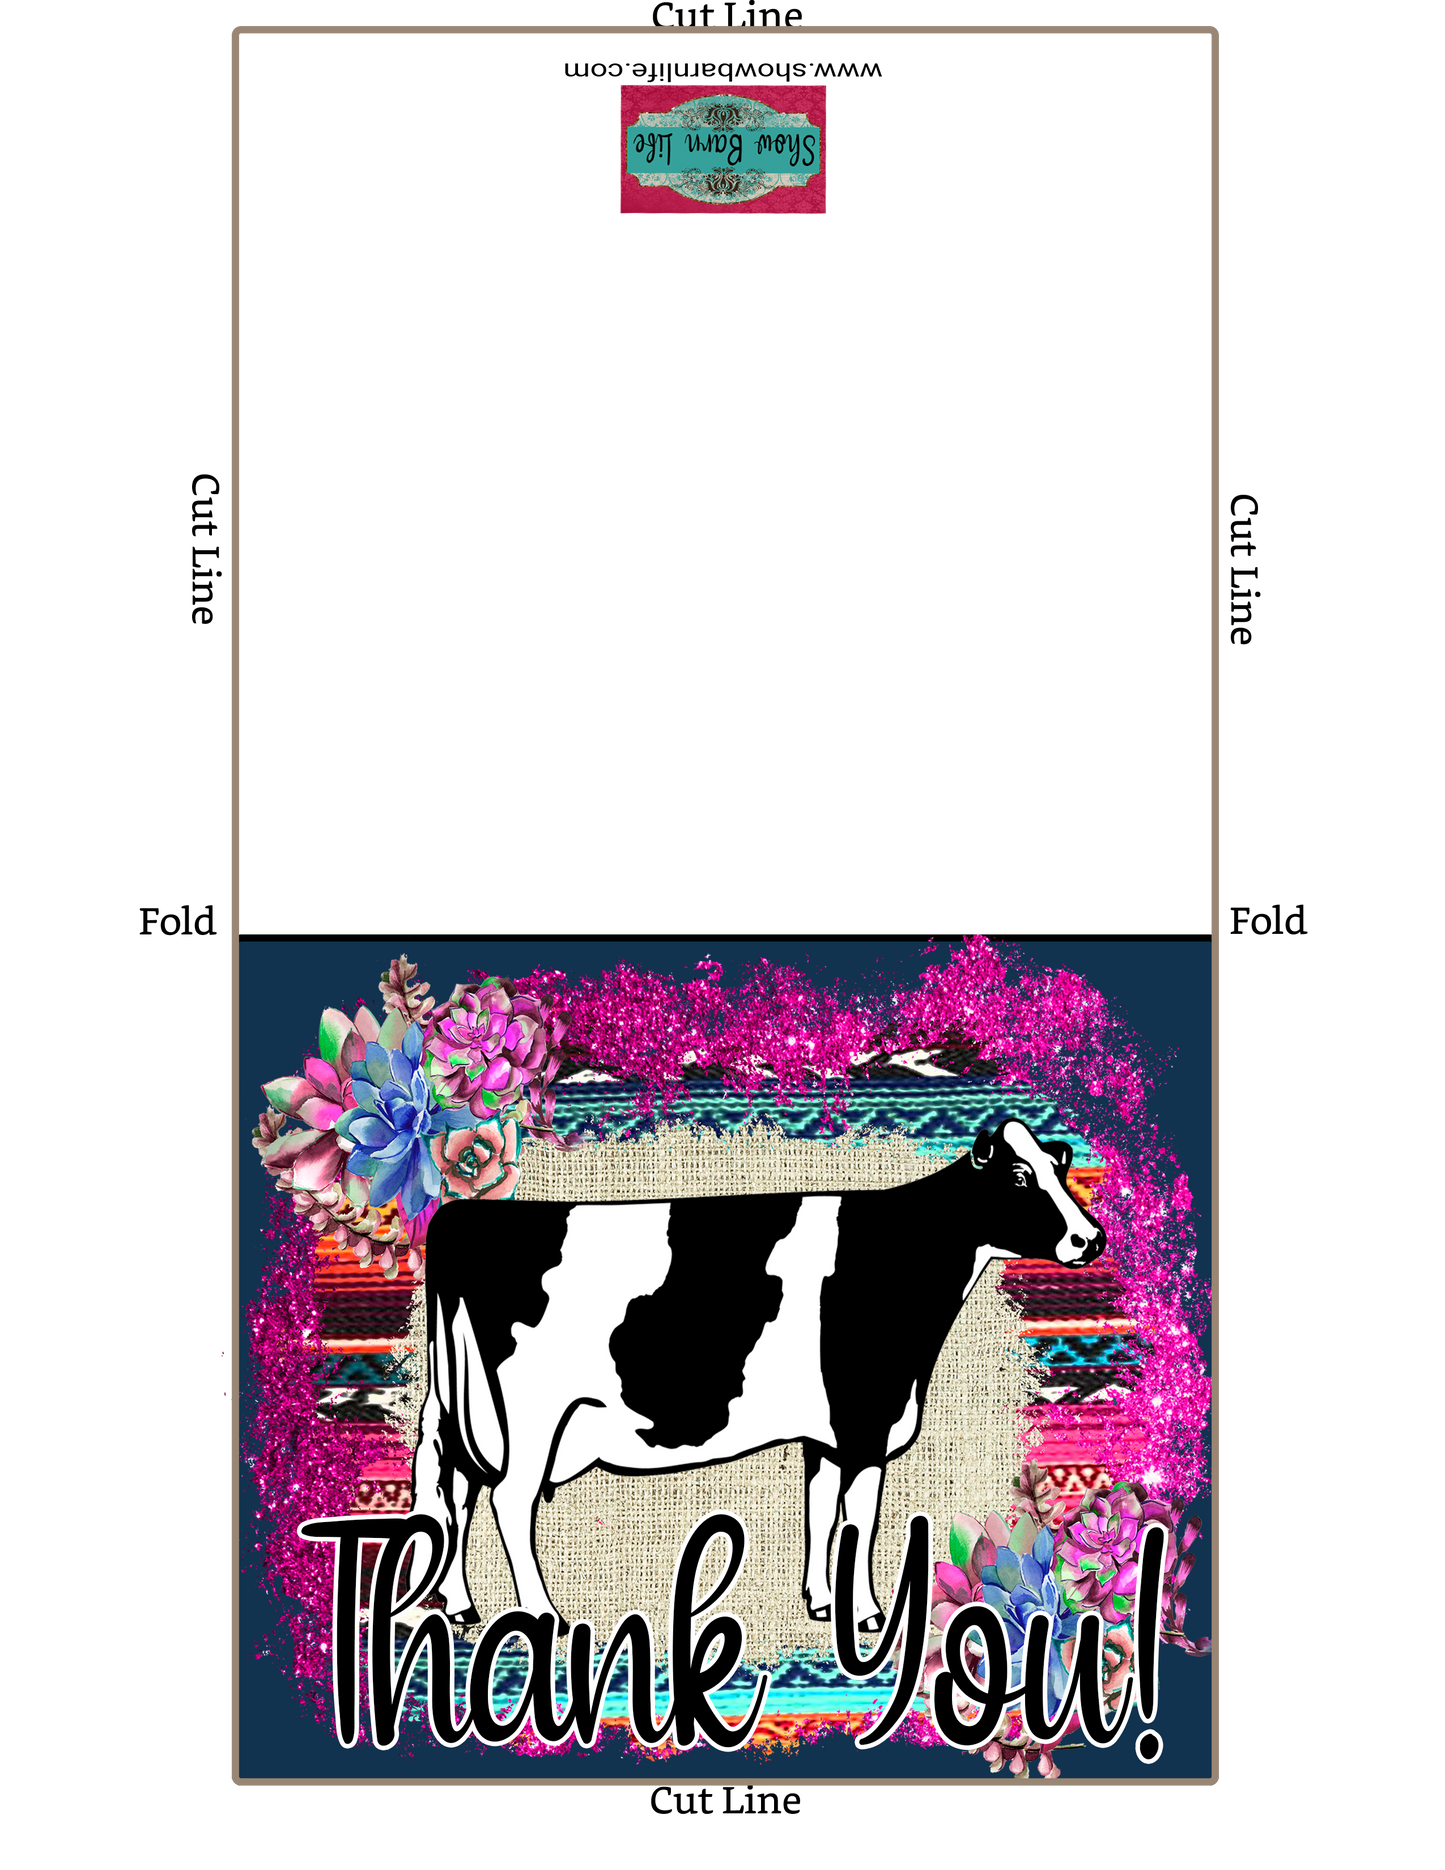 Livestock Show Holstein Dairy Cow Thank You Printable Card - 5 x 7" Envelope Template - Cow Card